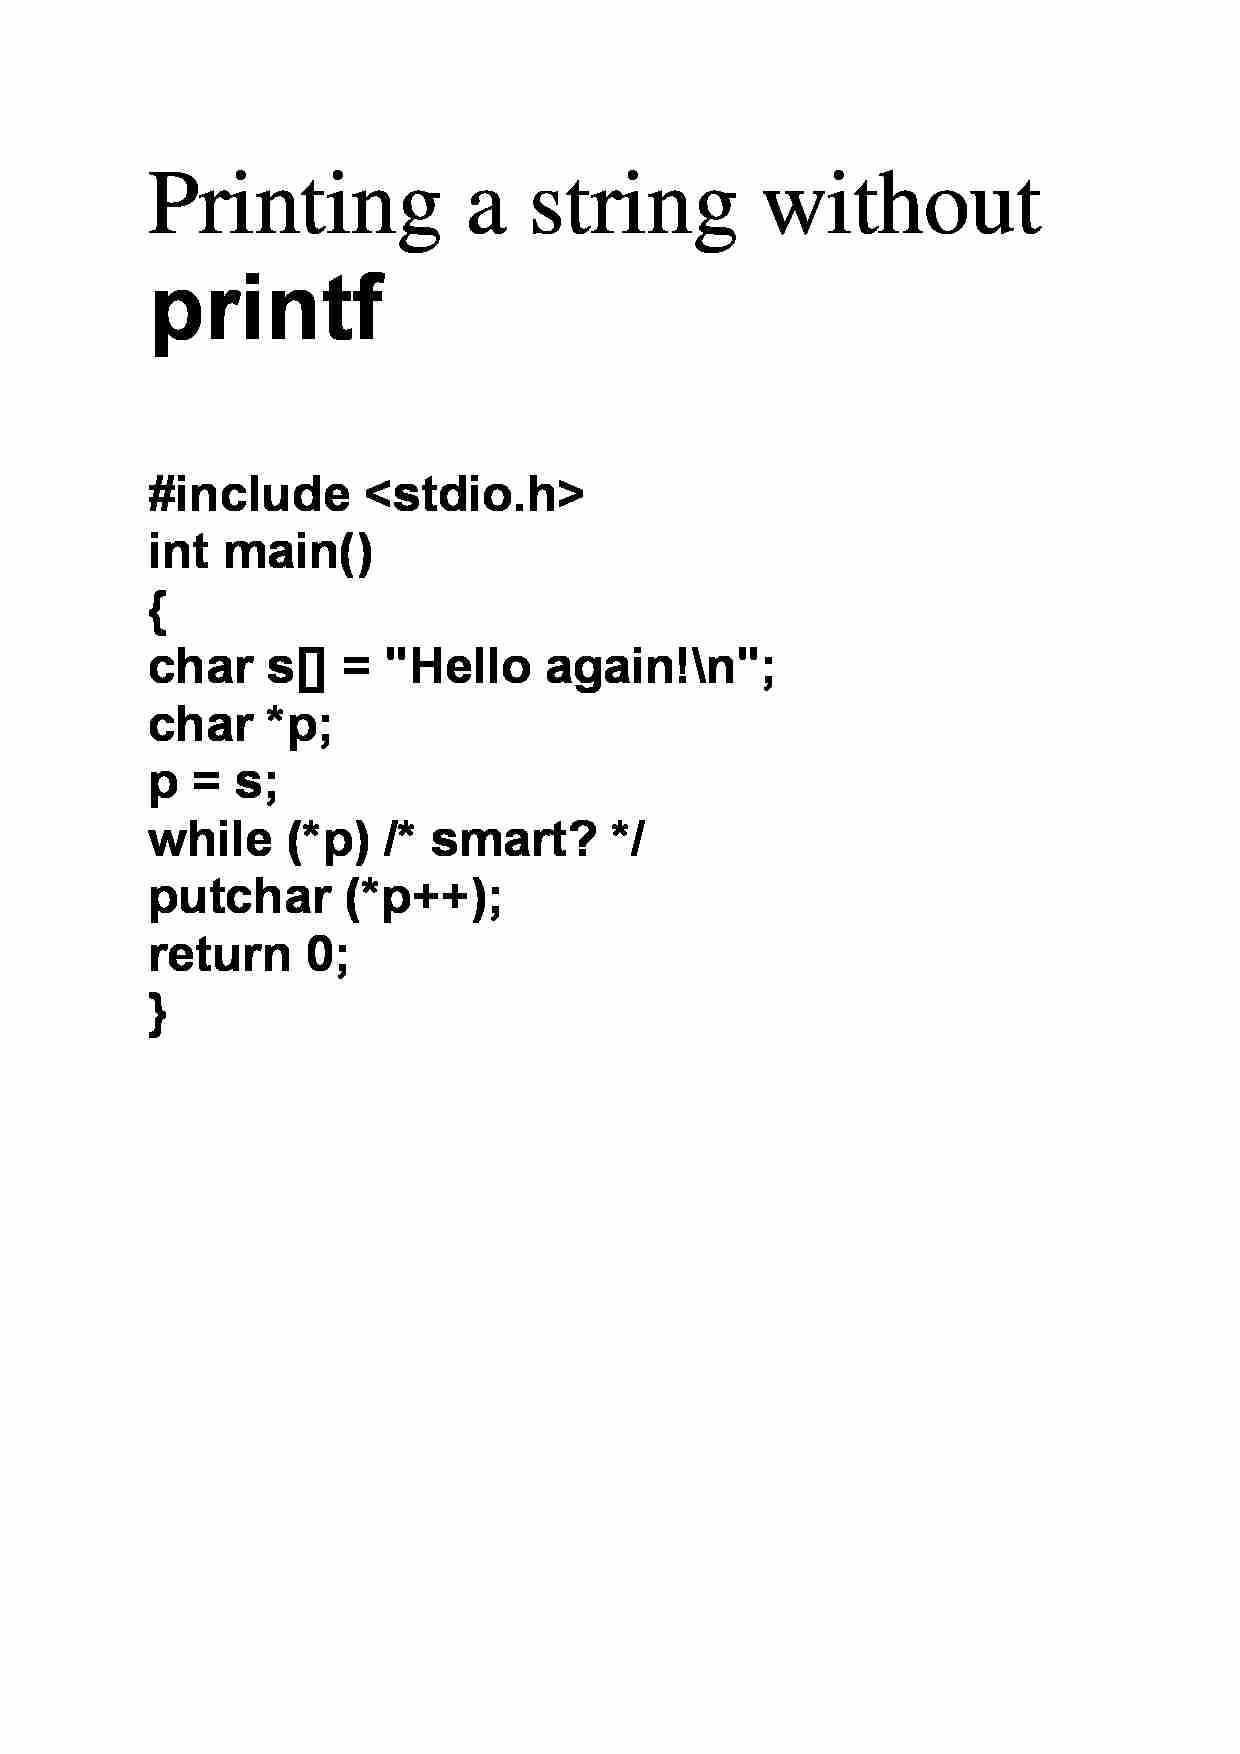 Printing a string without printf - strona 1